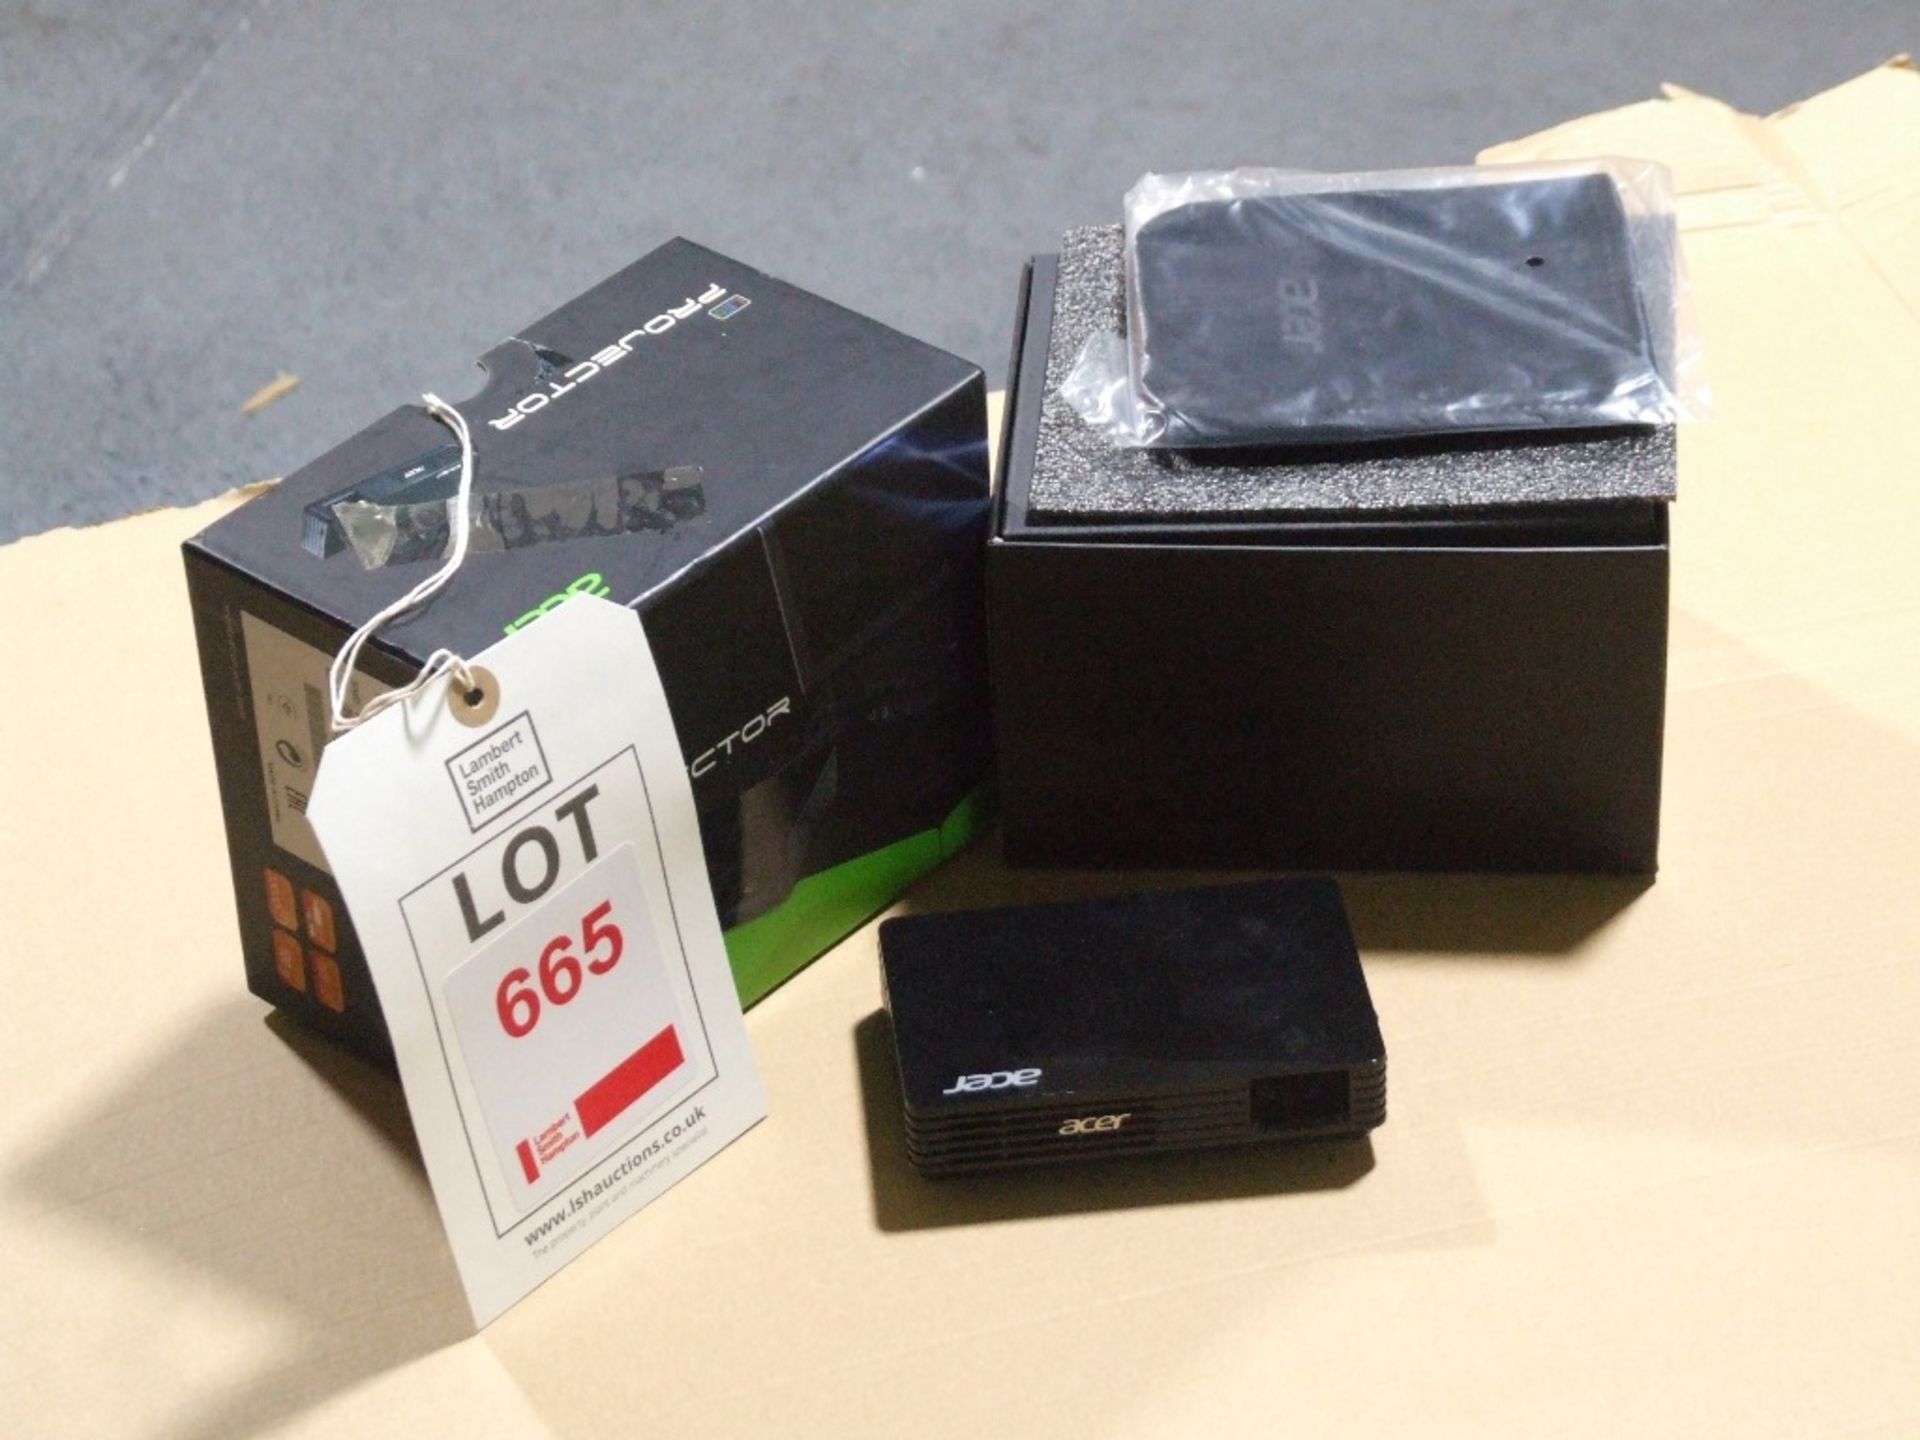 Acer C120 LED pocket projector, boxed, with AC adaptor and case